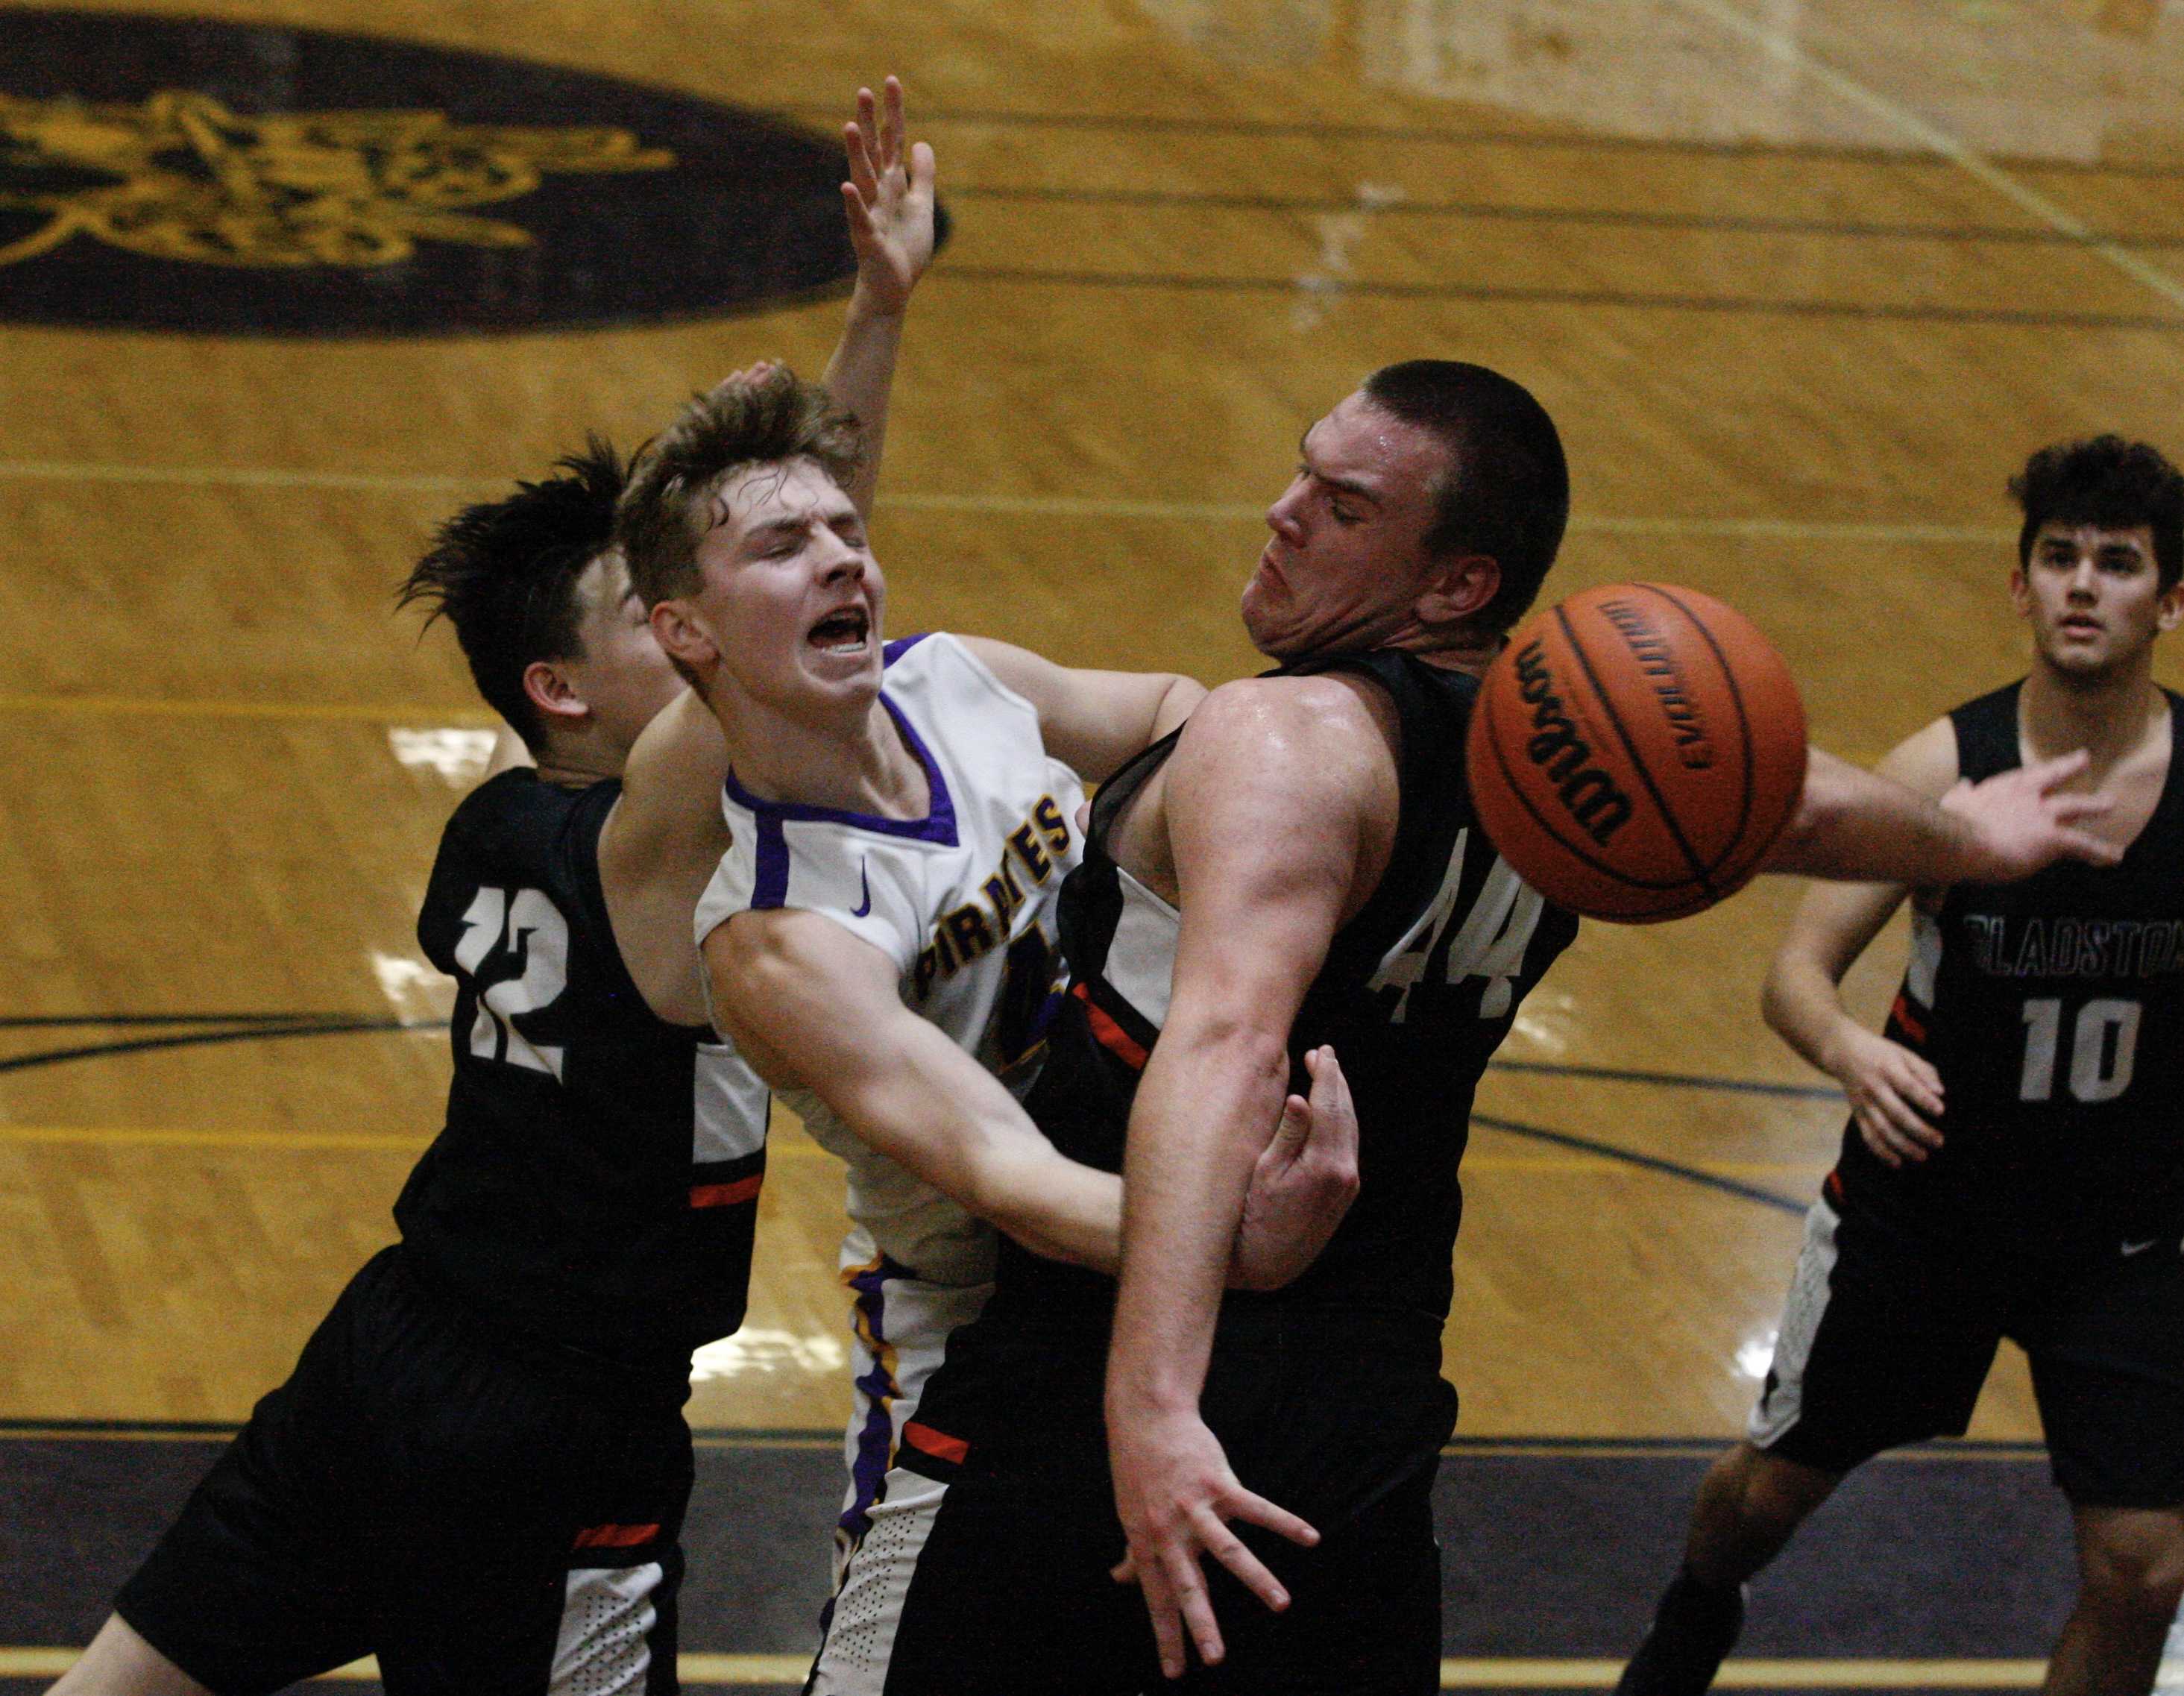 Marshfield's Jordy Miles gets caught in a squeeze from Thomas Tacha and Jackson Simmons of Gladstone. (Norm Maves Jr.)